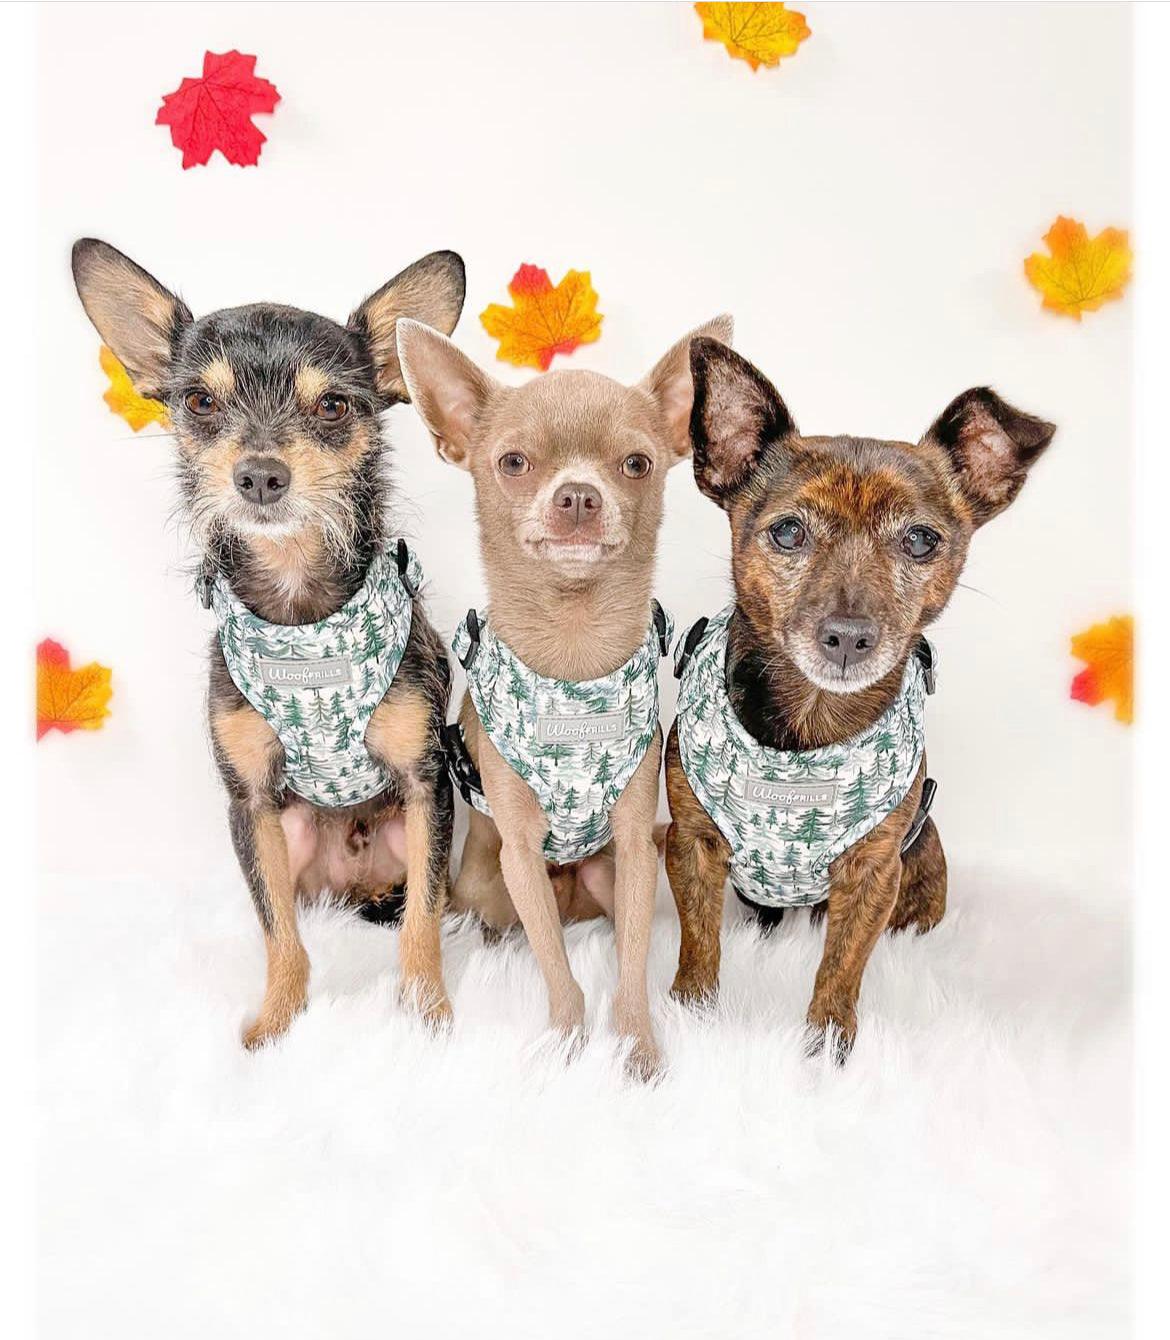 Three cute dogs wearing matching dog harnesses